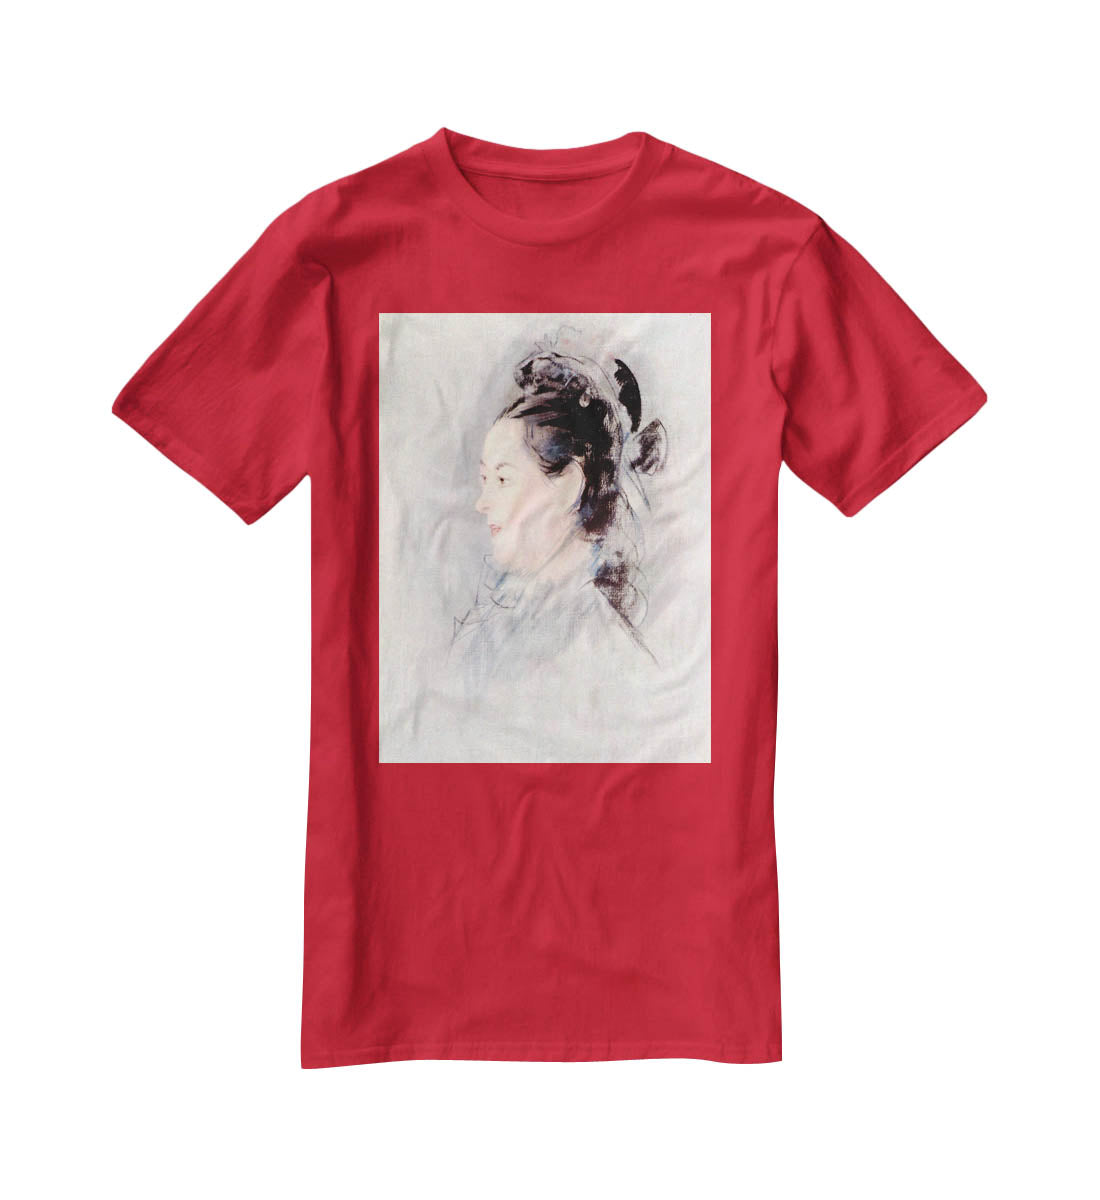 Lady with Hair Up by manet T-Shirt - Canvas Art Rocks - 4